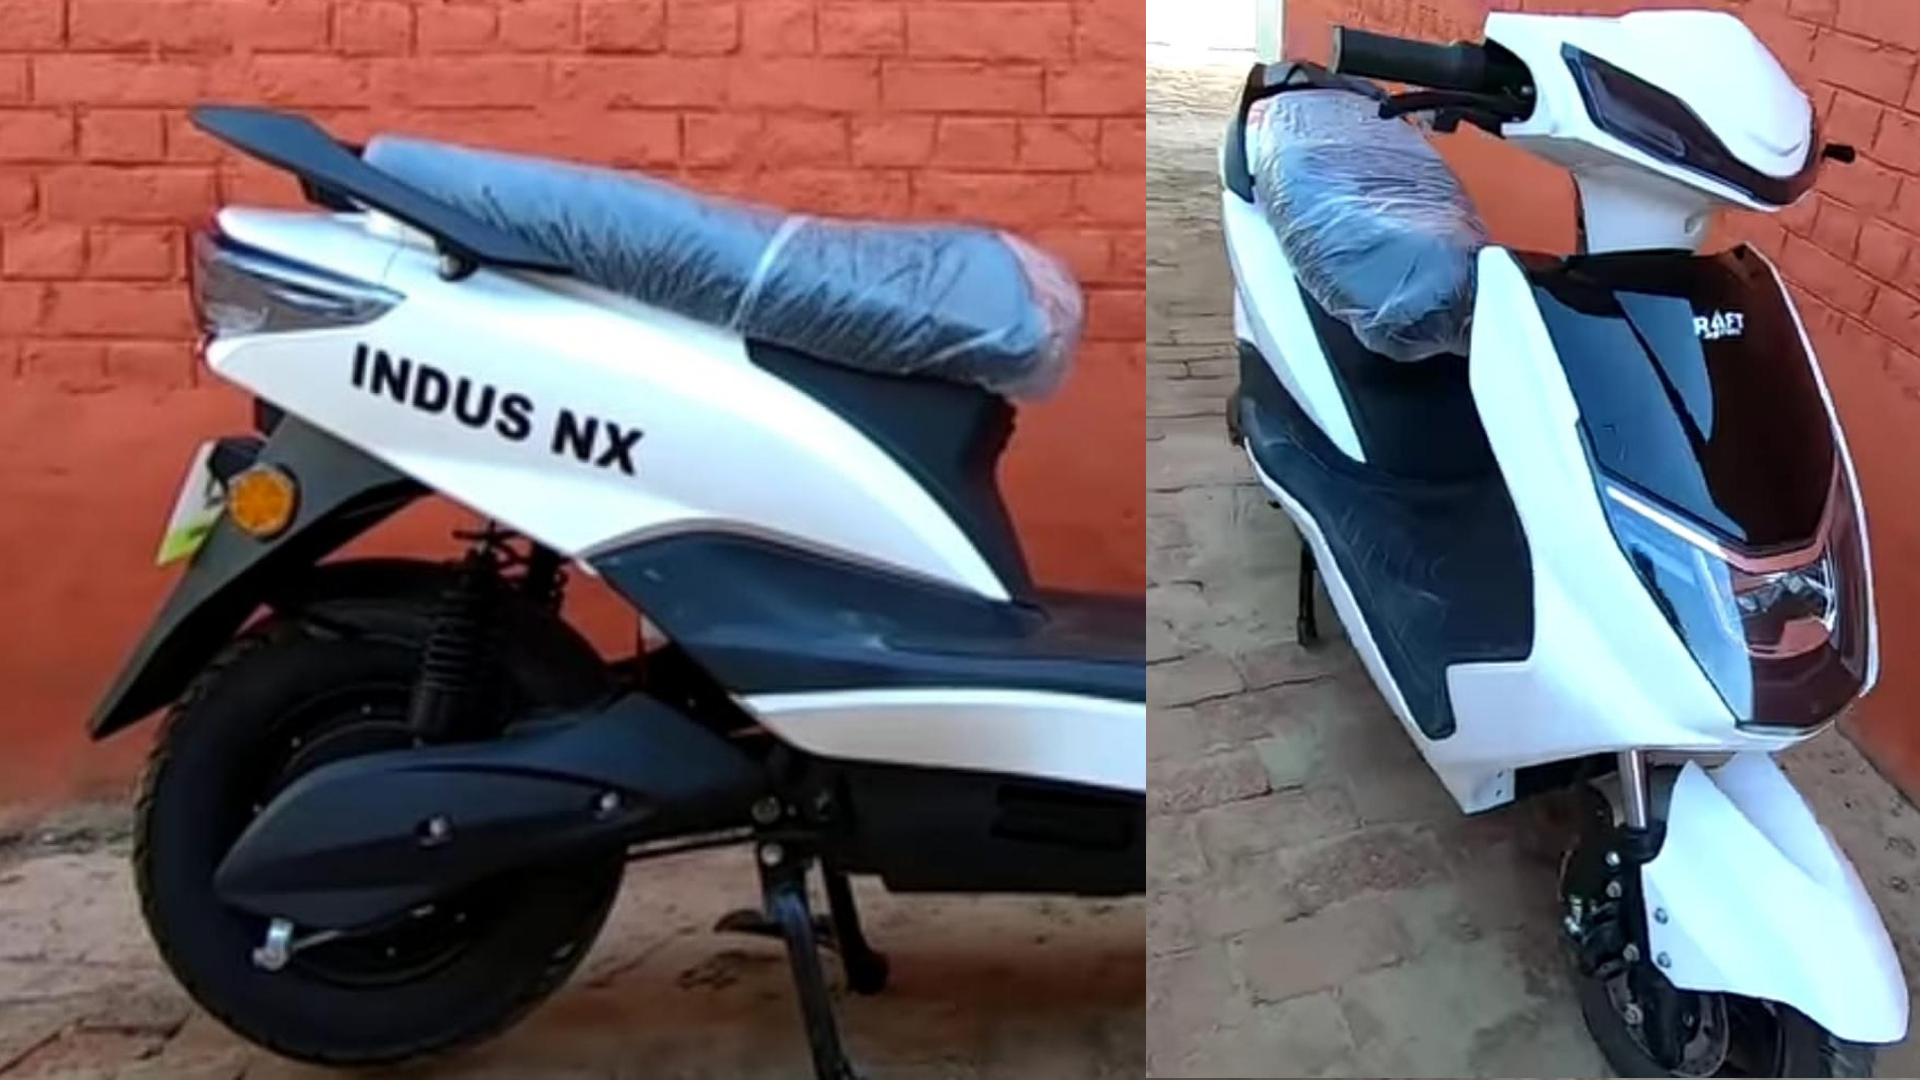 https://e-vehicleinfo.com/indus-nx-higest-range-electric-scooter-comes-with-450km/